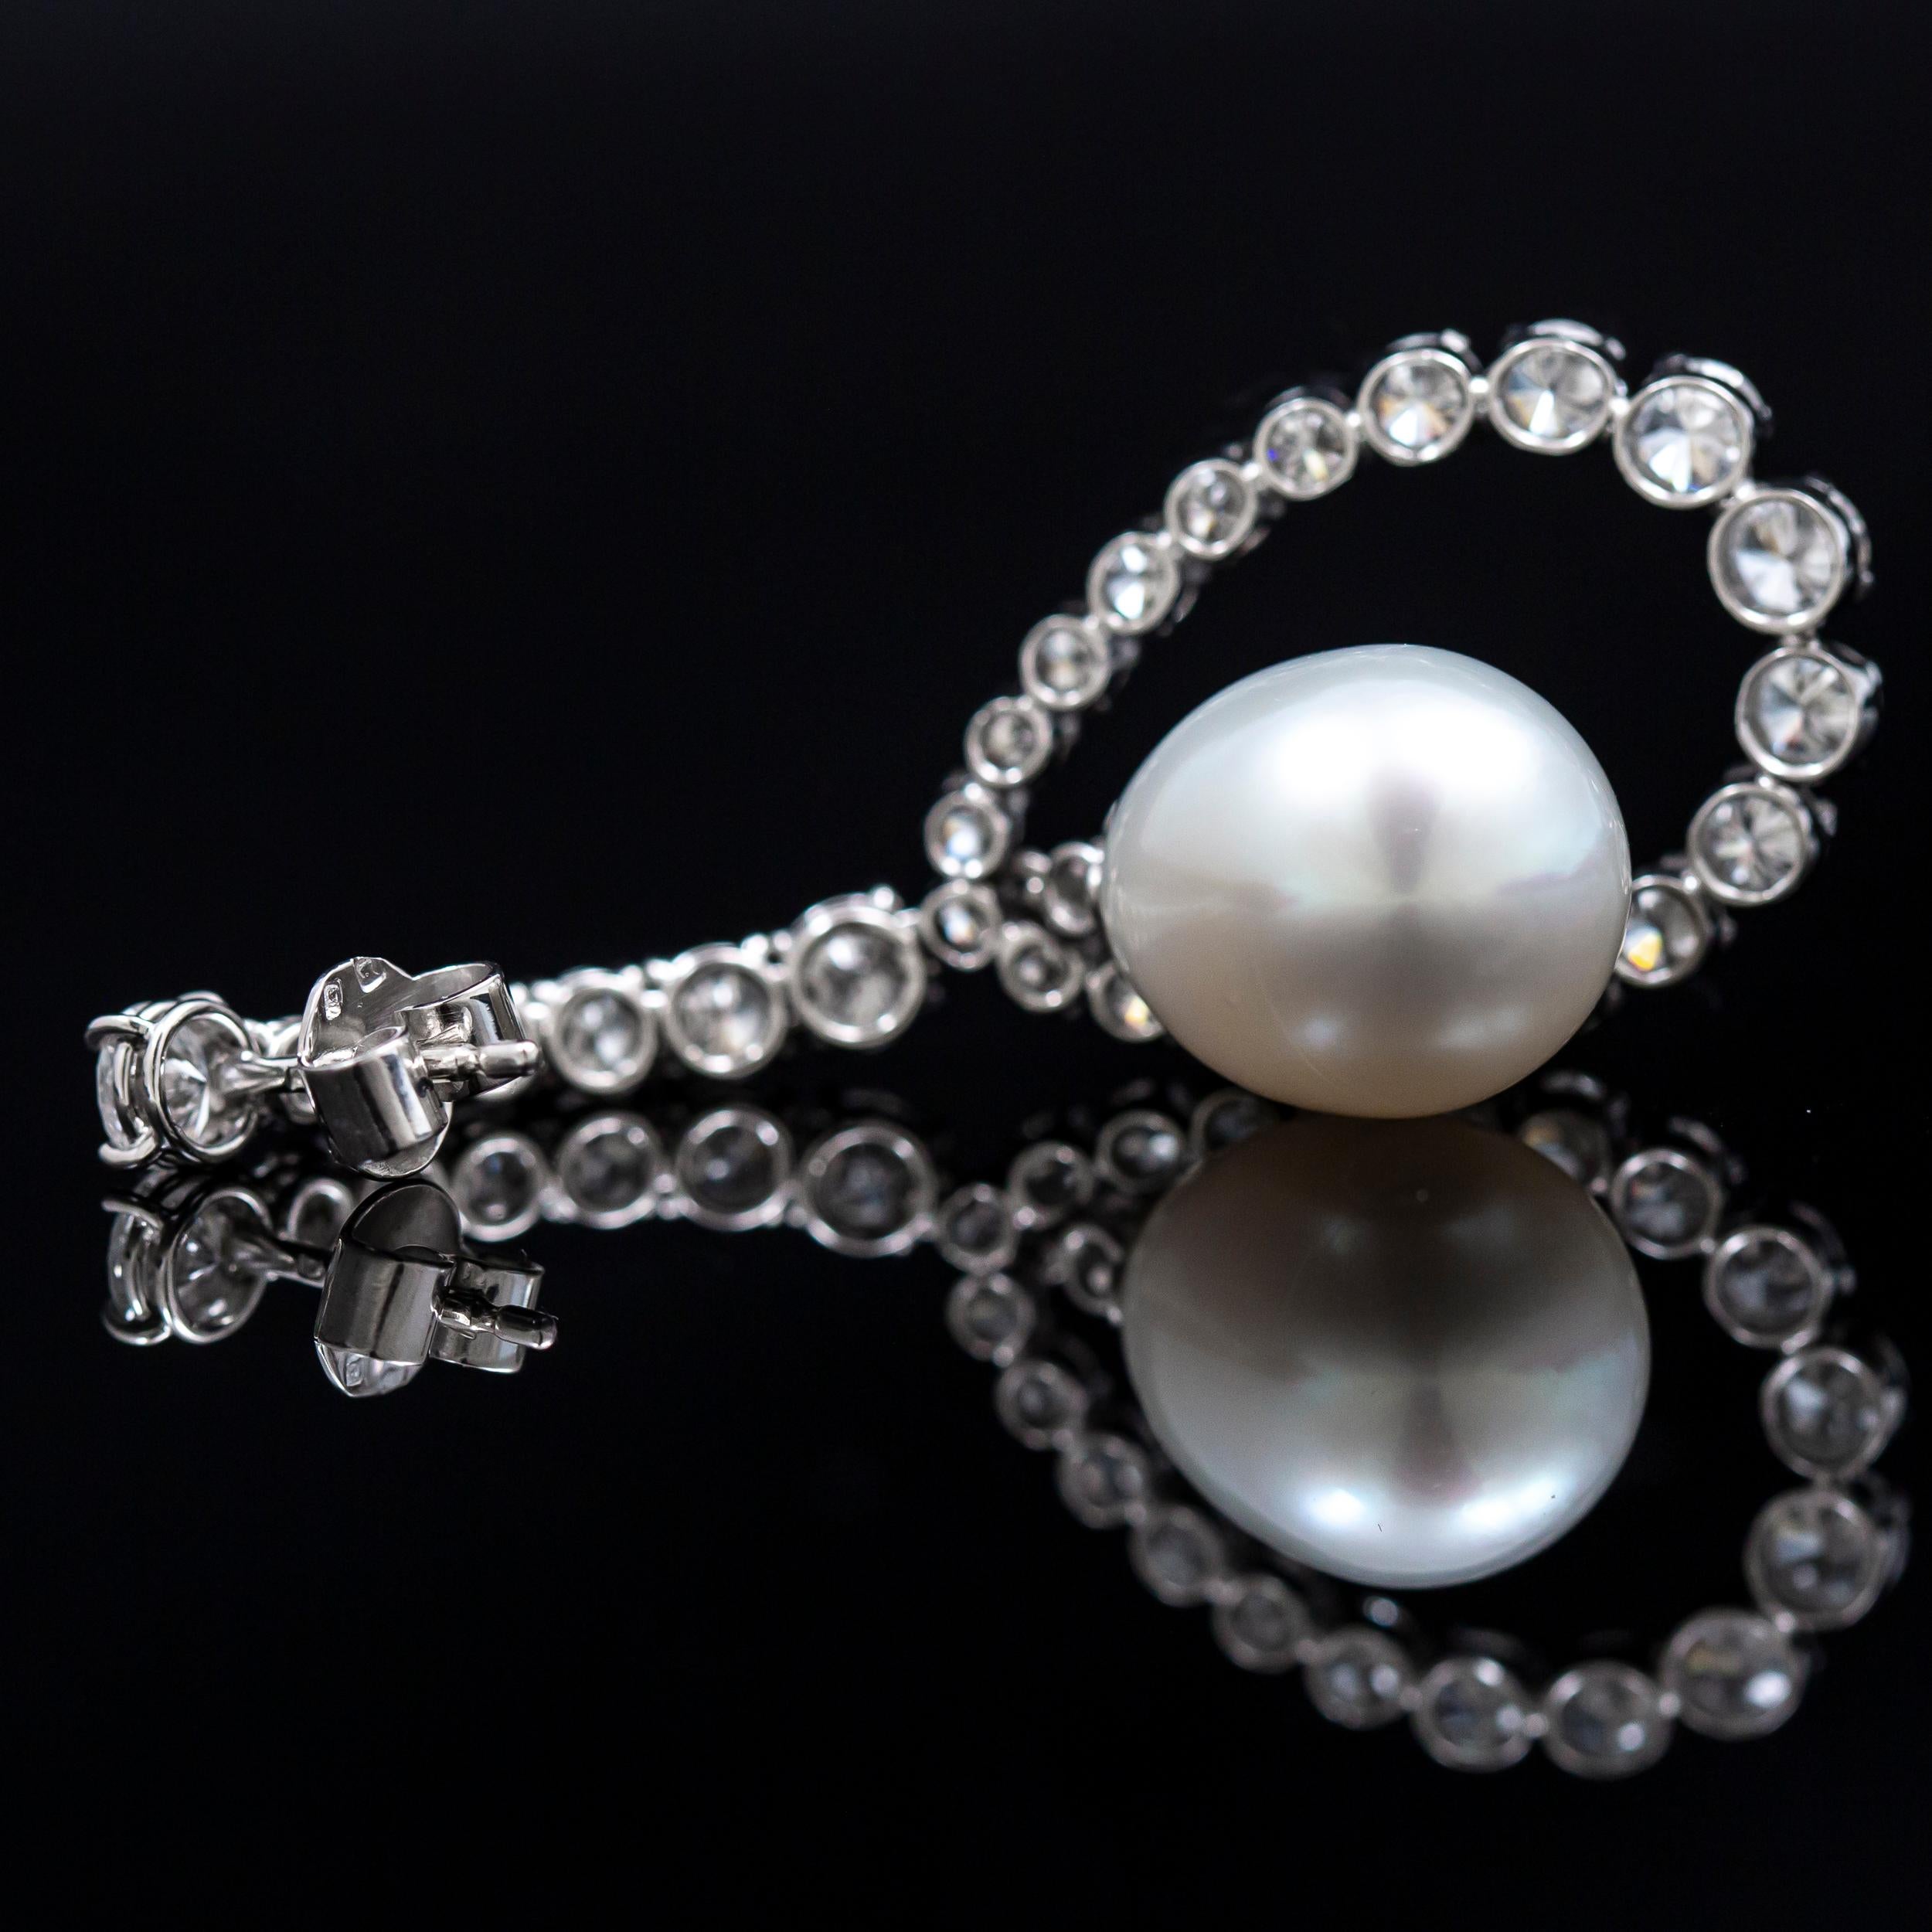 Vintage 6 Carat Diamond Cultured Pearl Drop Earrings White Gold 20th Century For Sale 3